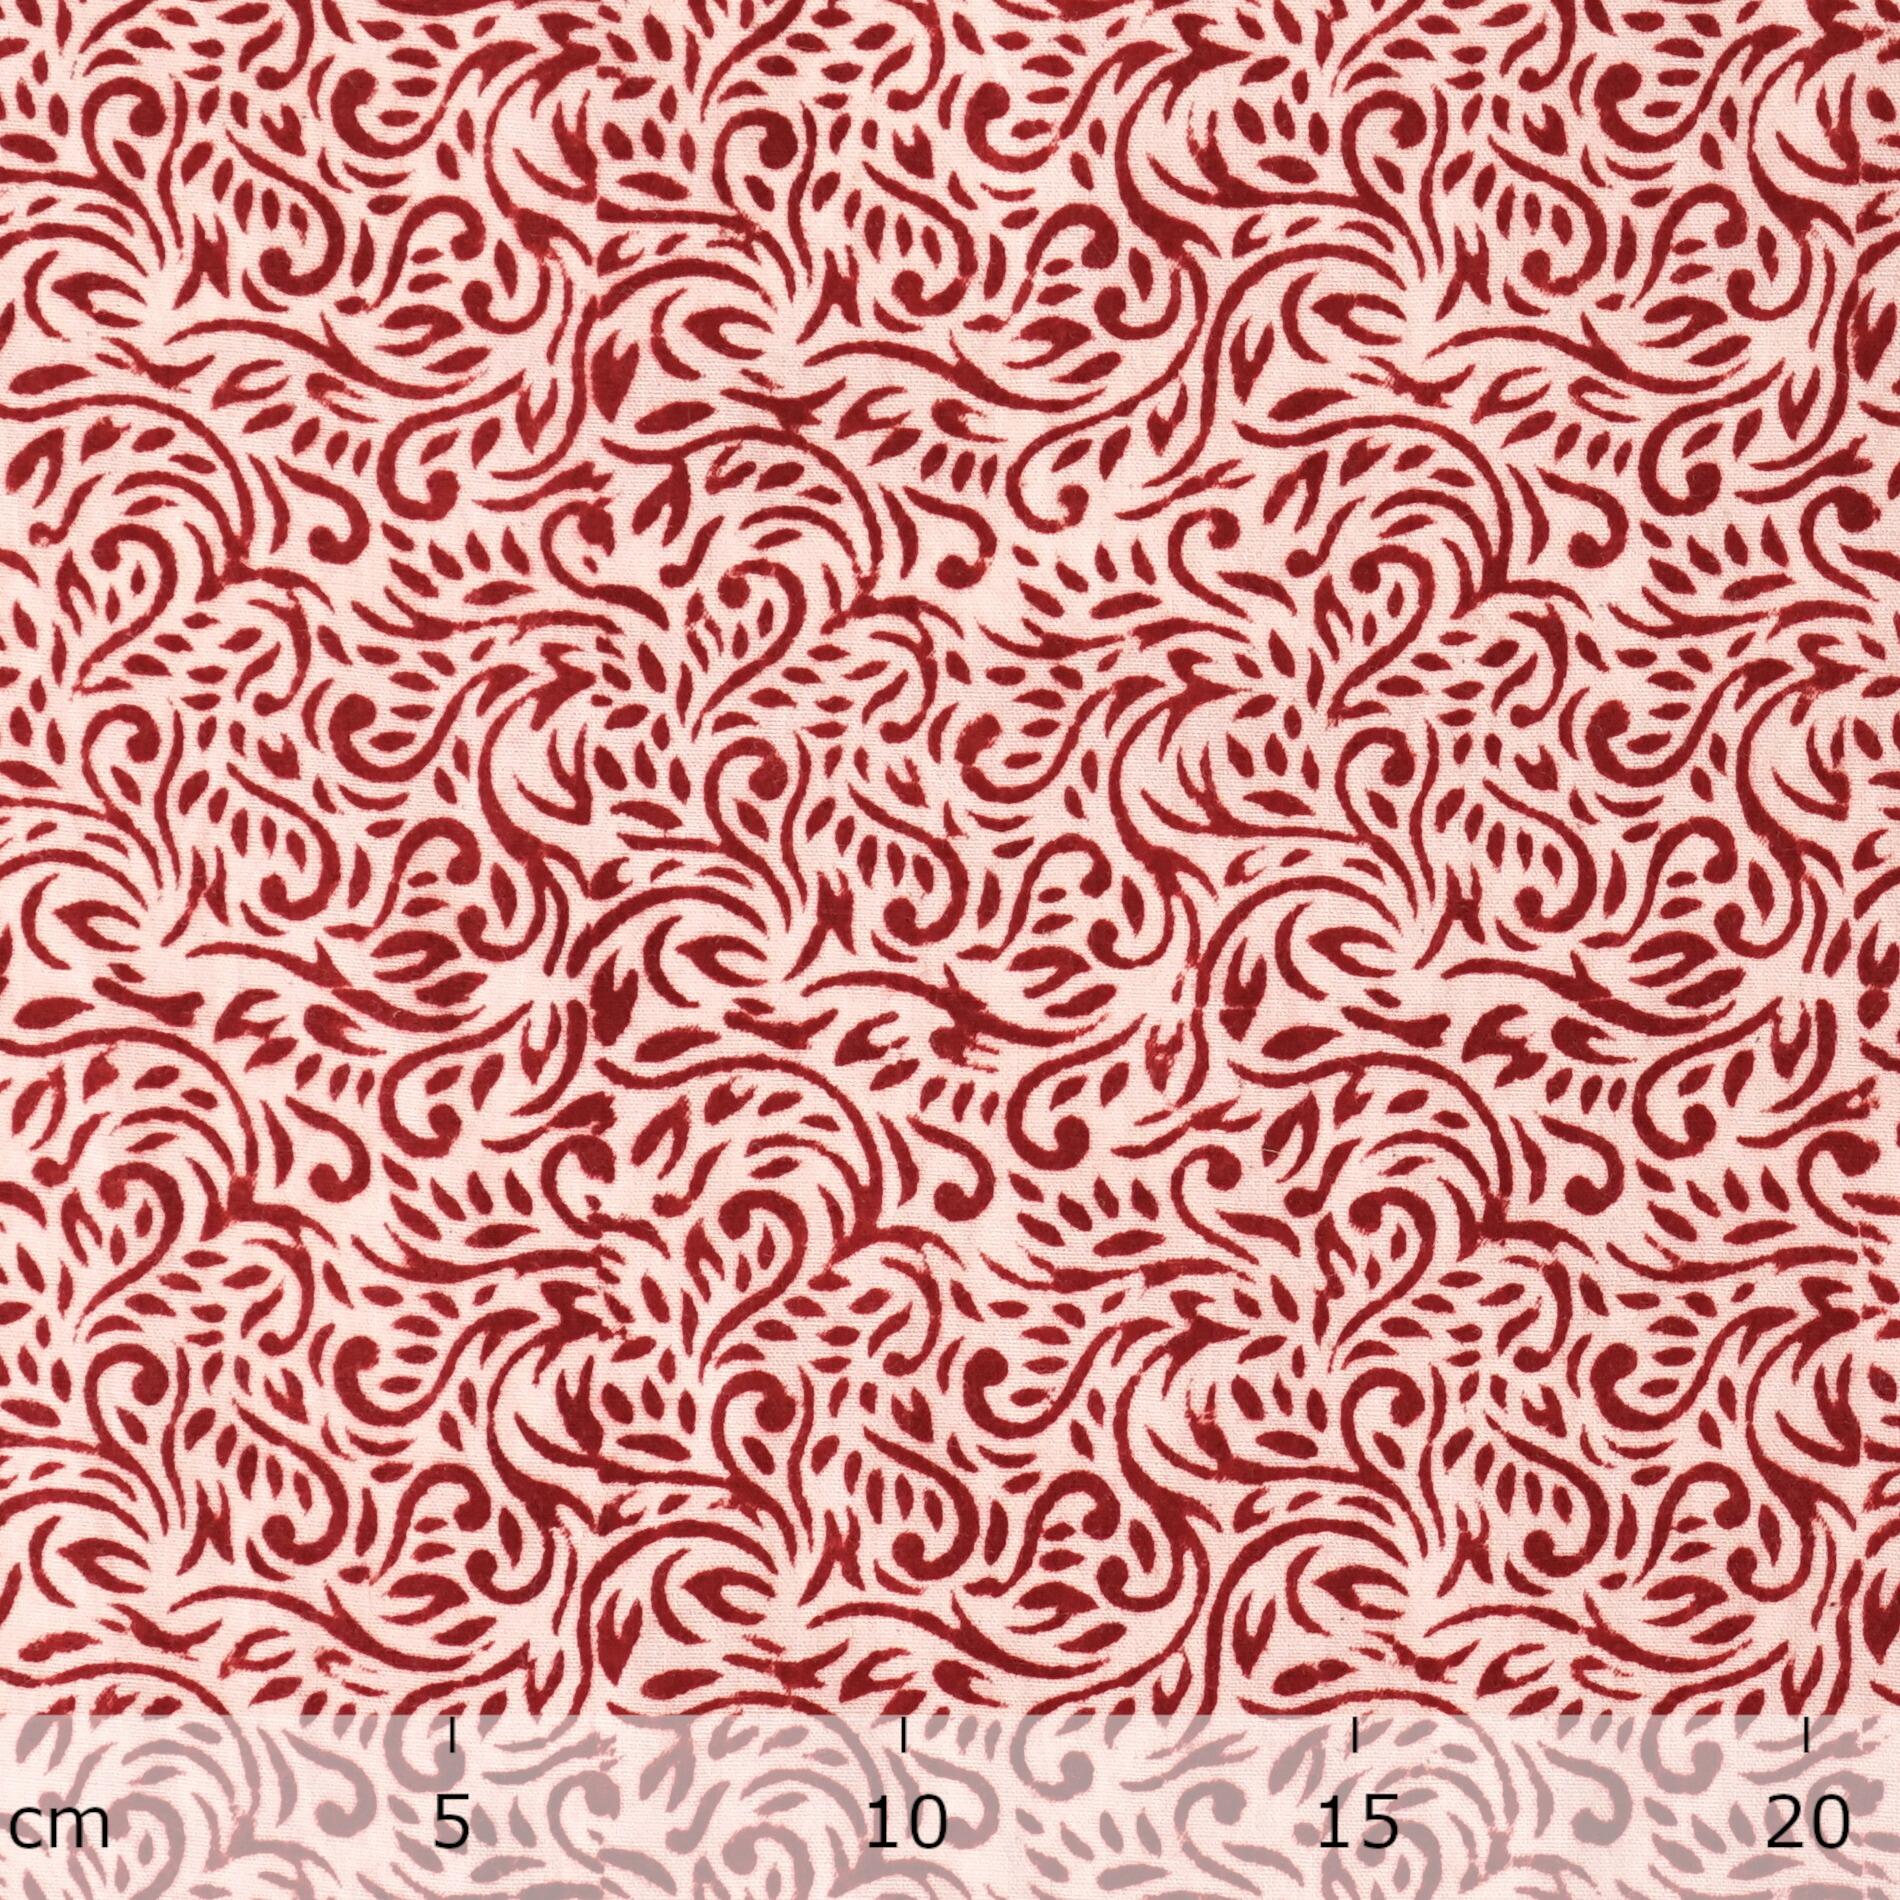 ISK27 - 100% Block-Printed Cotton Fabric From India - Bagh Printing Method - Alizarin Red Scorching Print - Ruler